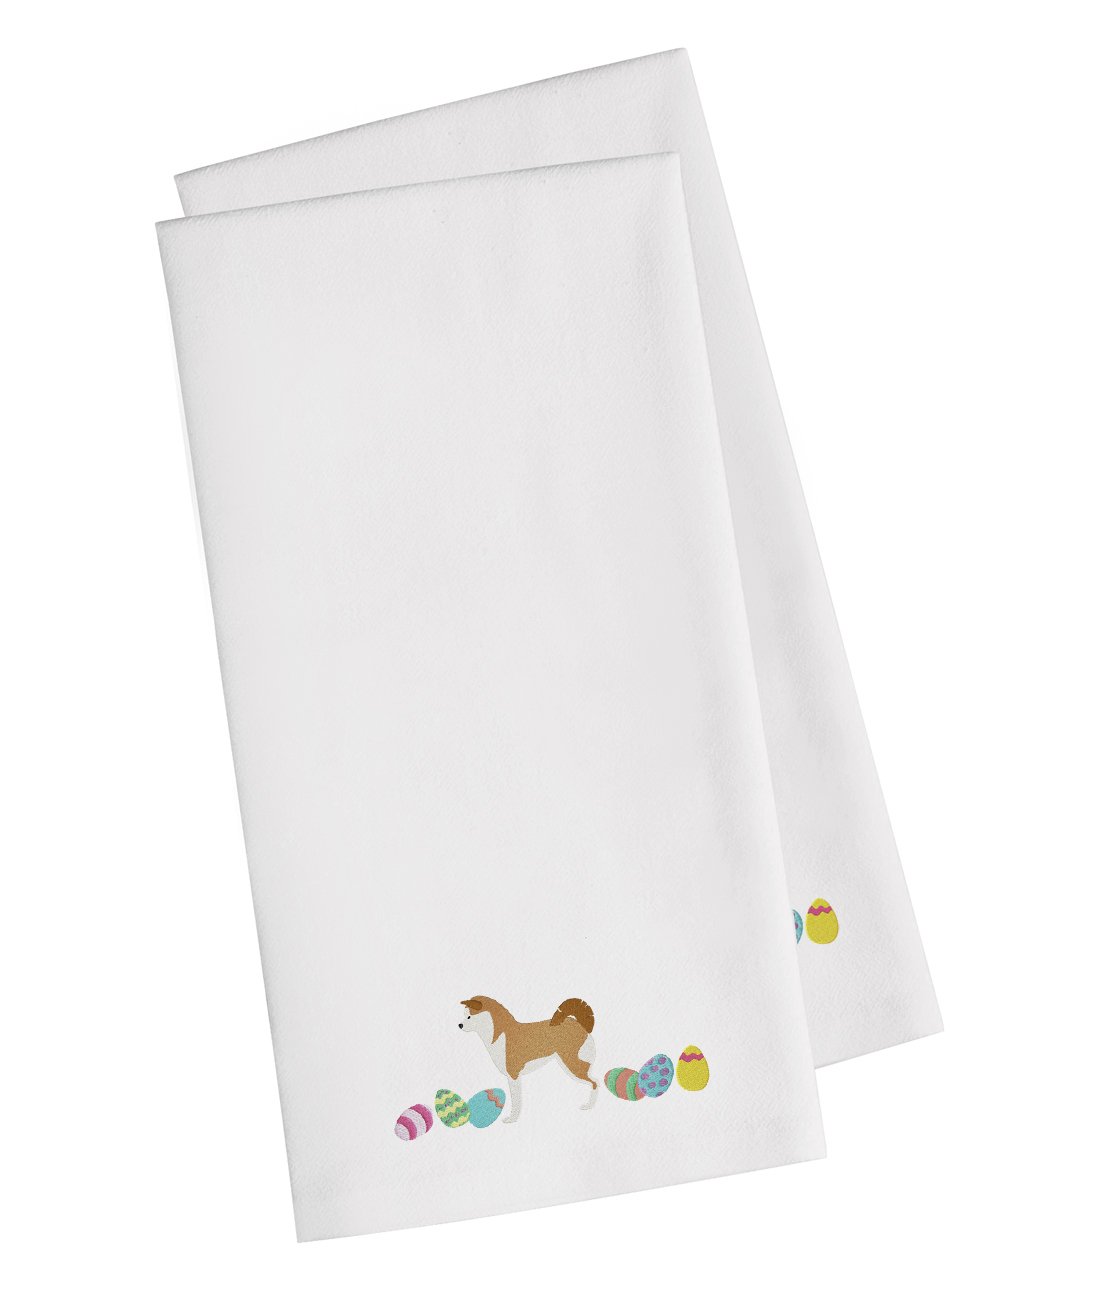 Akita Easter White Embroidered Kitchen Towel Set of 2 CK1595WHTWE by Caroline's Treasures